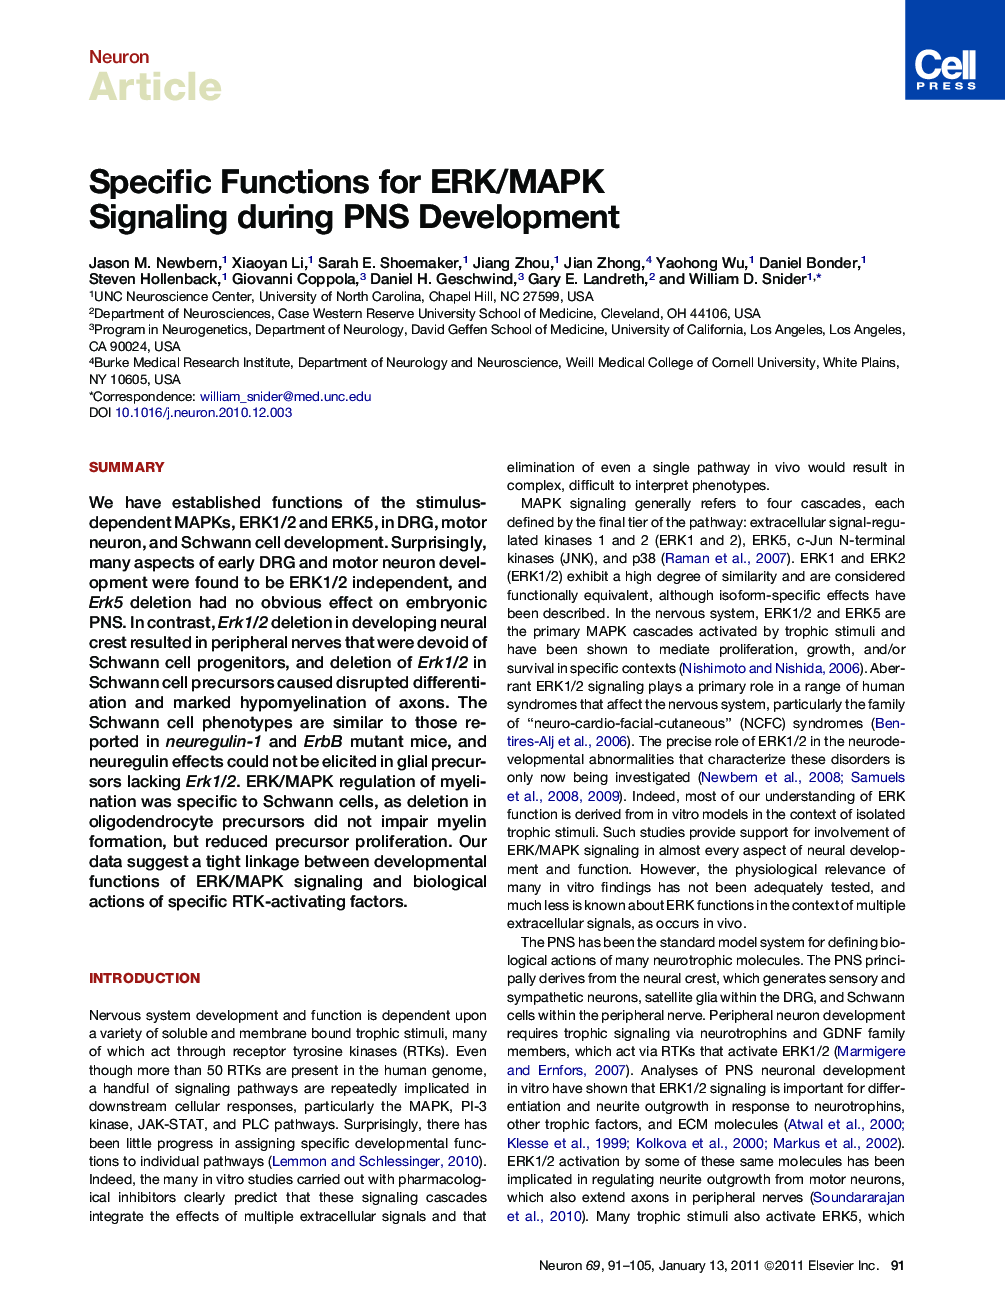 Specific Functions for ERK/MAPK Signaling during PNS Development